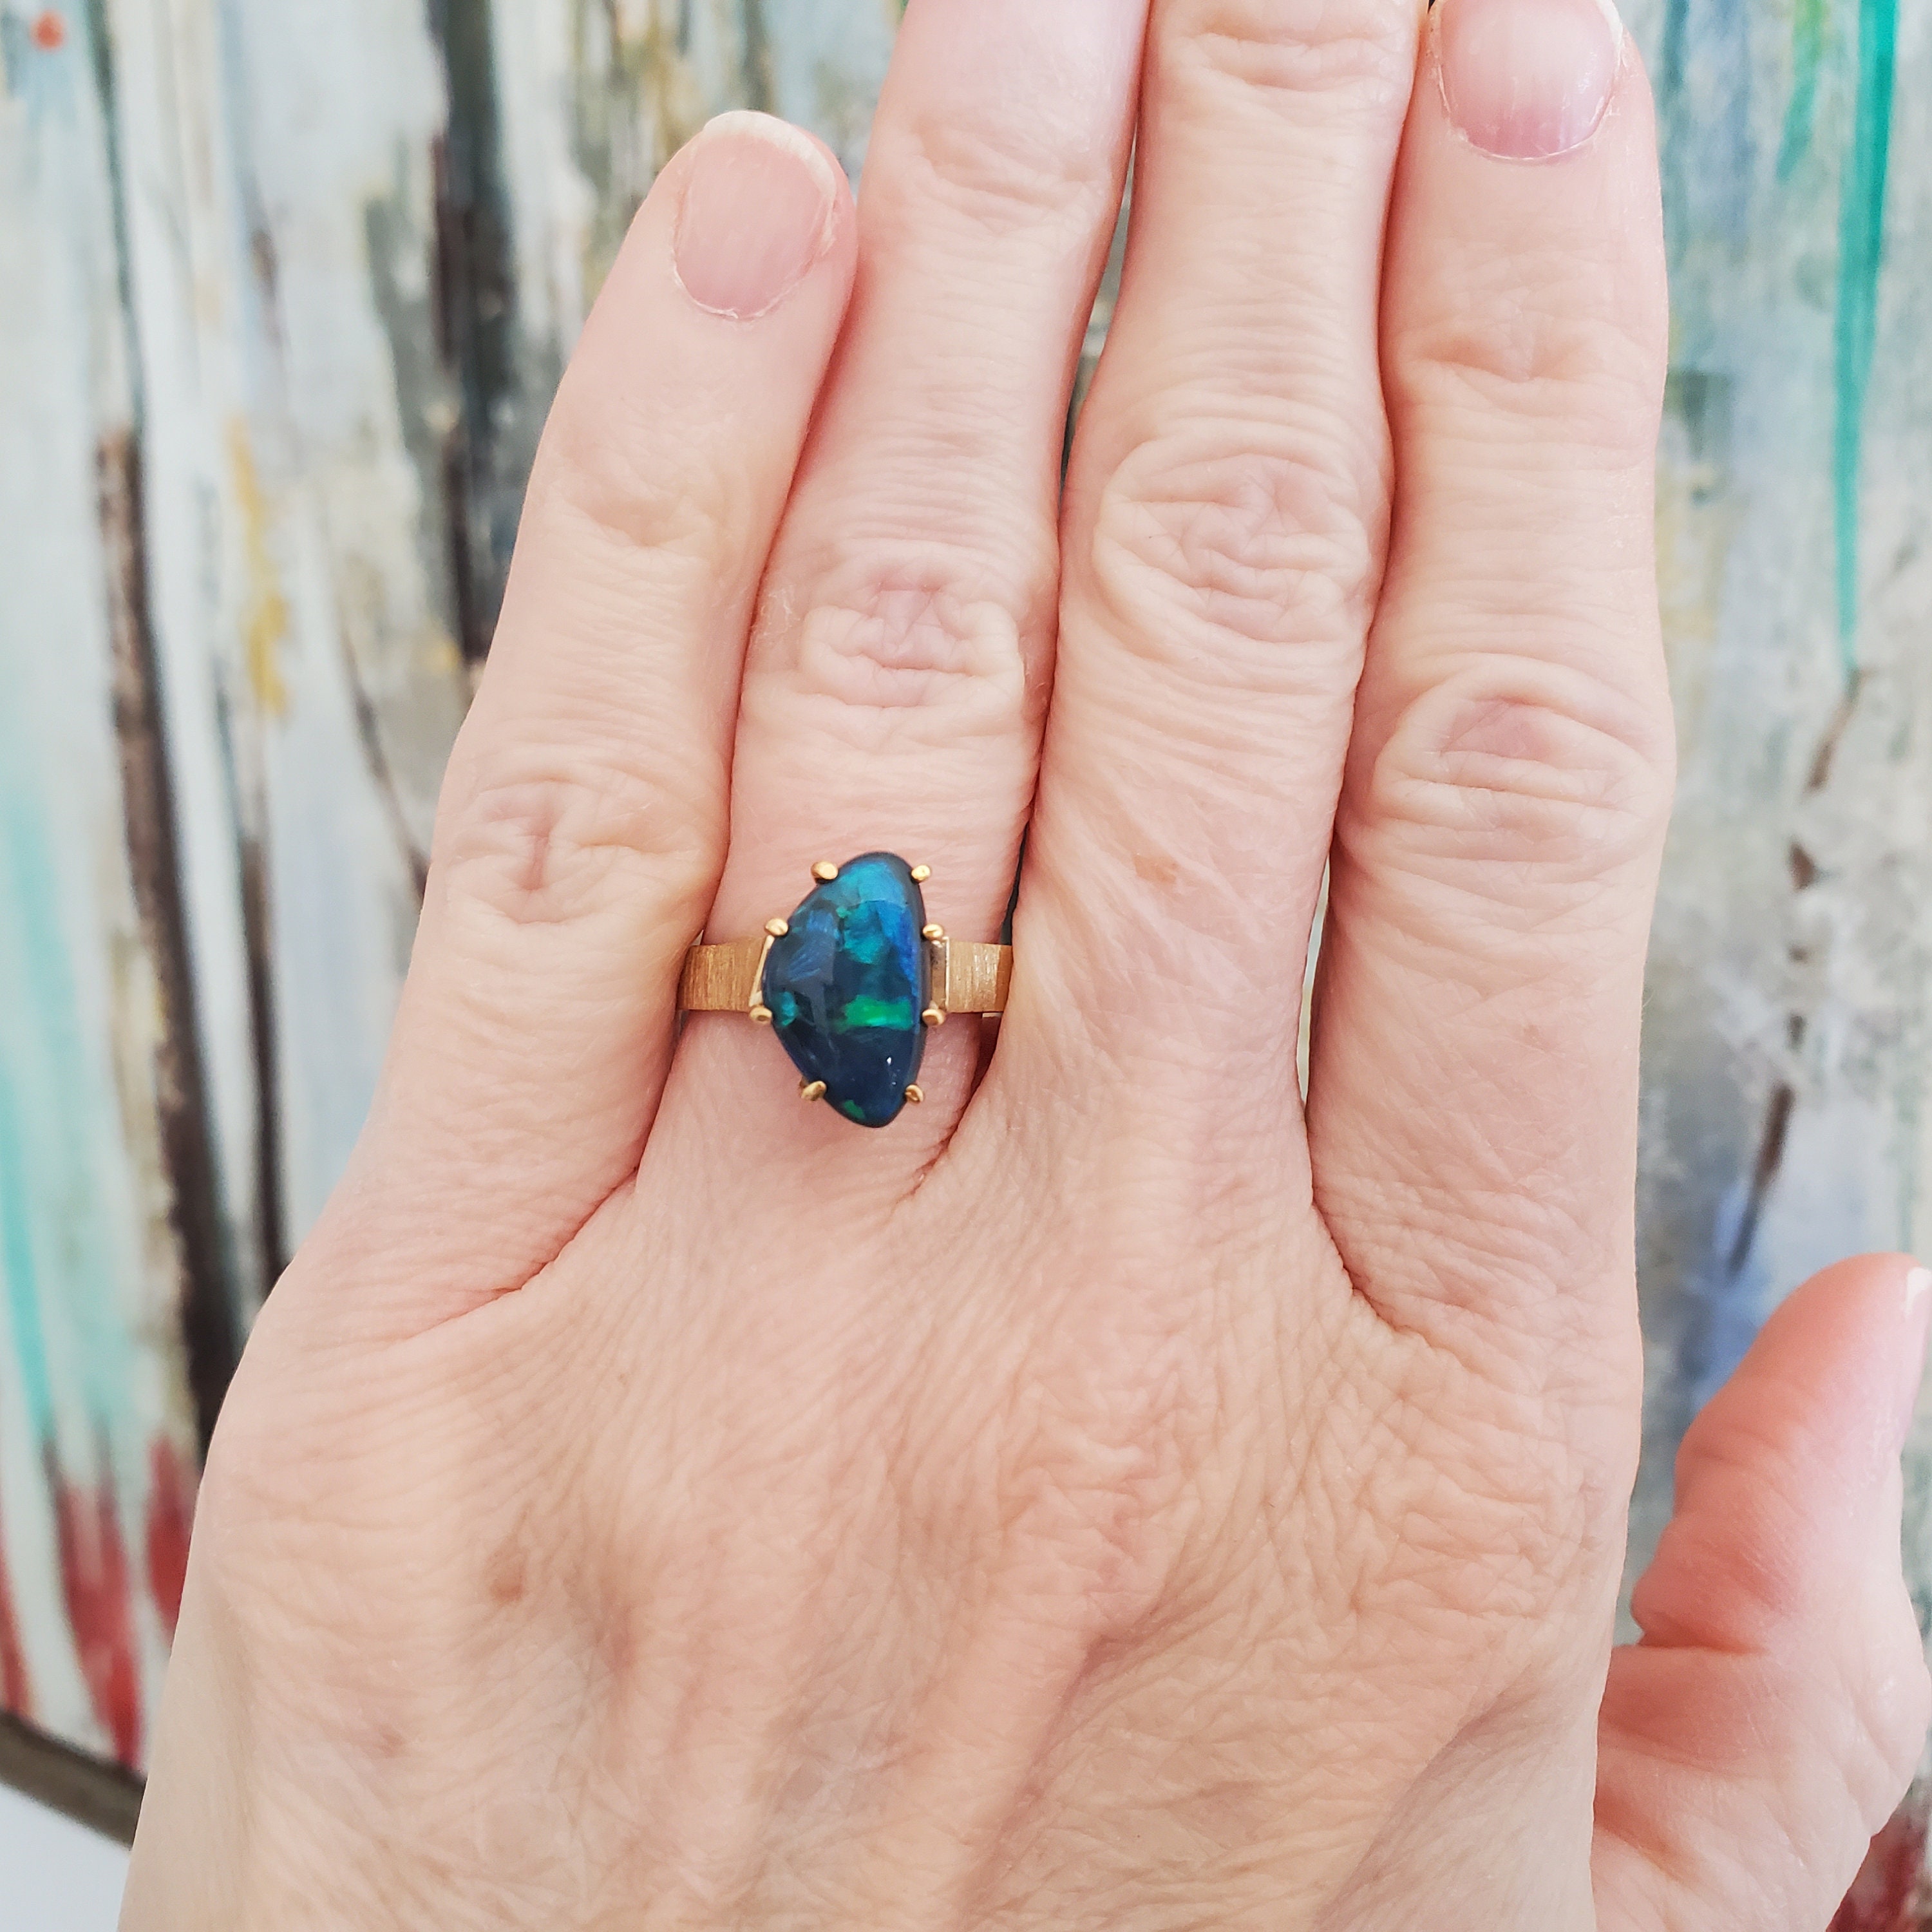 Natural Black Opal Men's Ring, 925 Sterling Silver 14K Yellow Gold Filed  Ring, Loose Opal Gemstone Ring, Opal Birthstone Gift Gift For Her -  Walmart.com